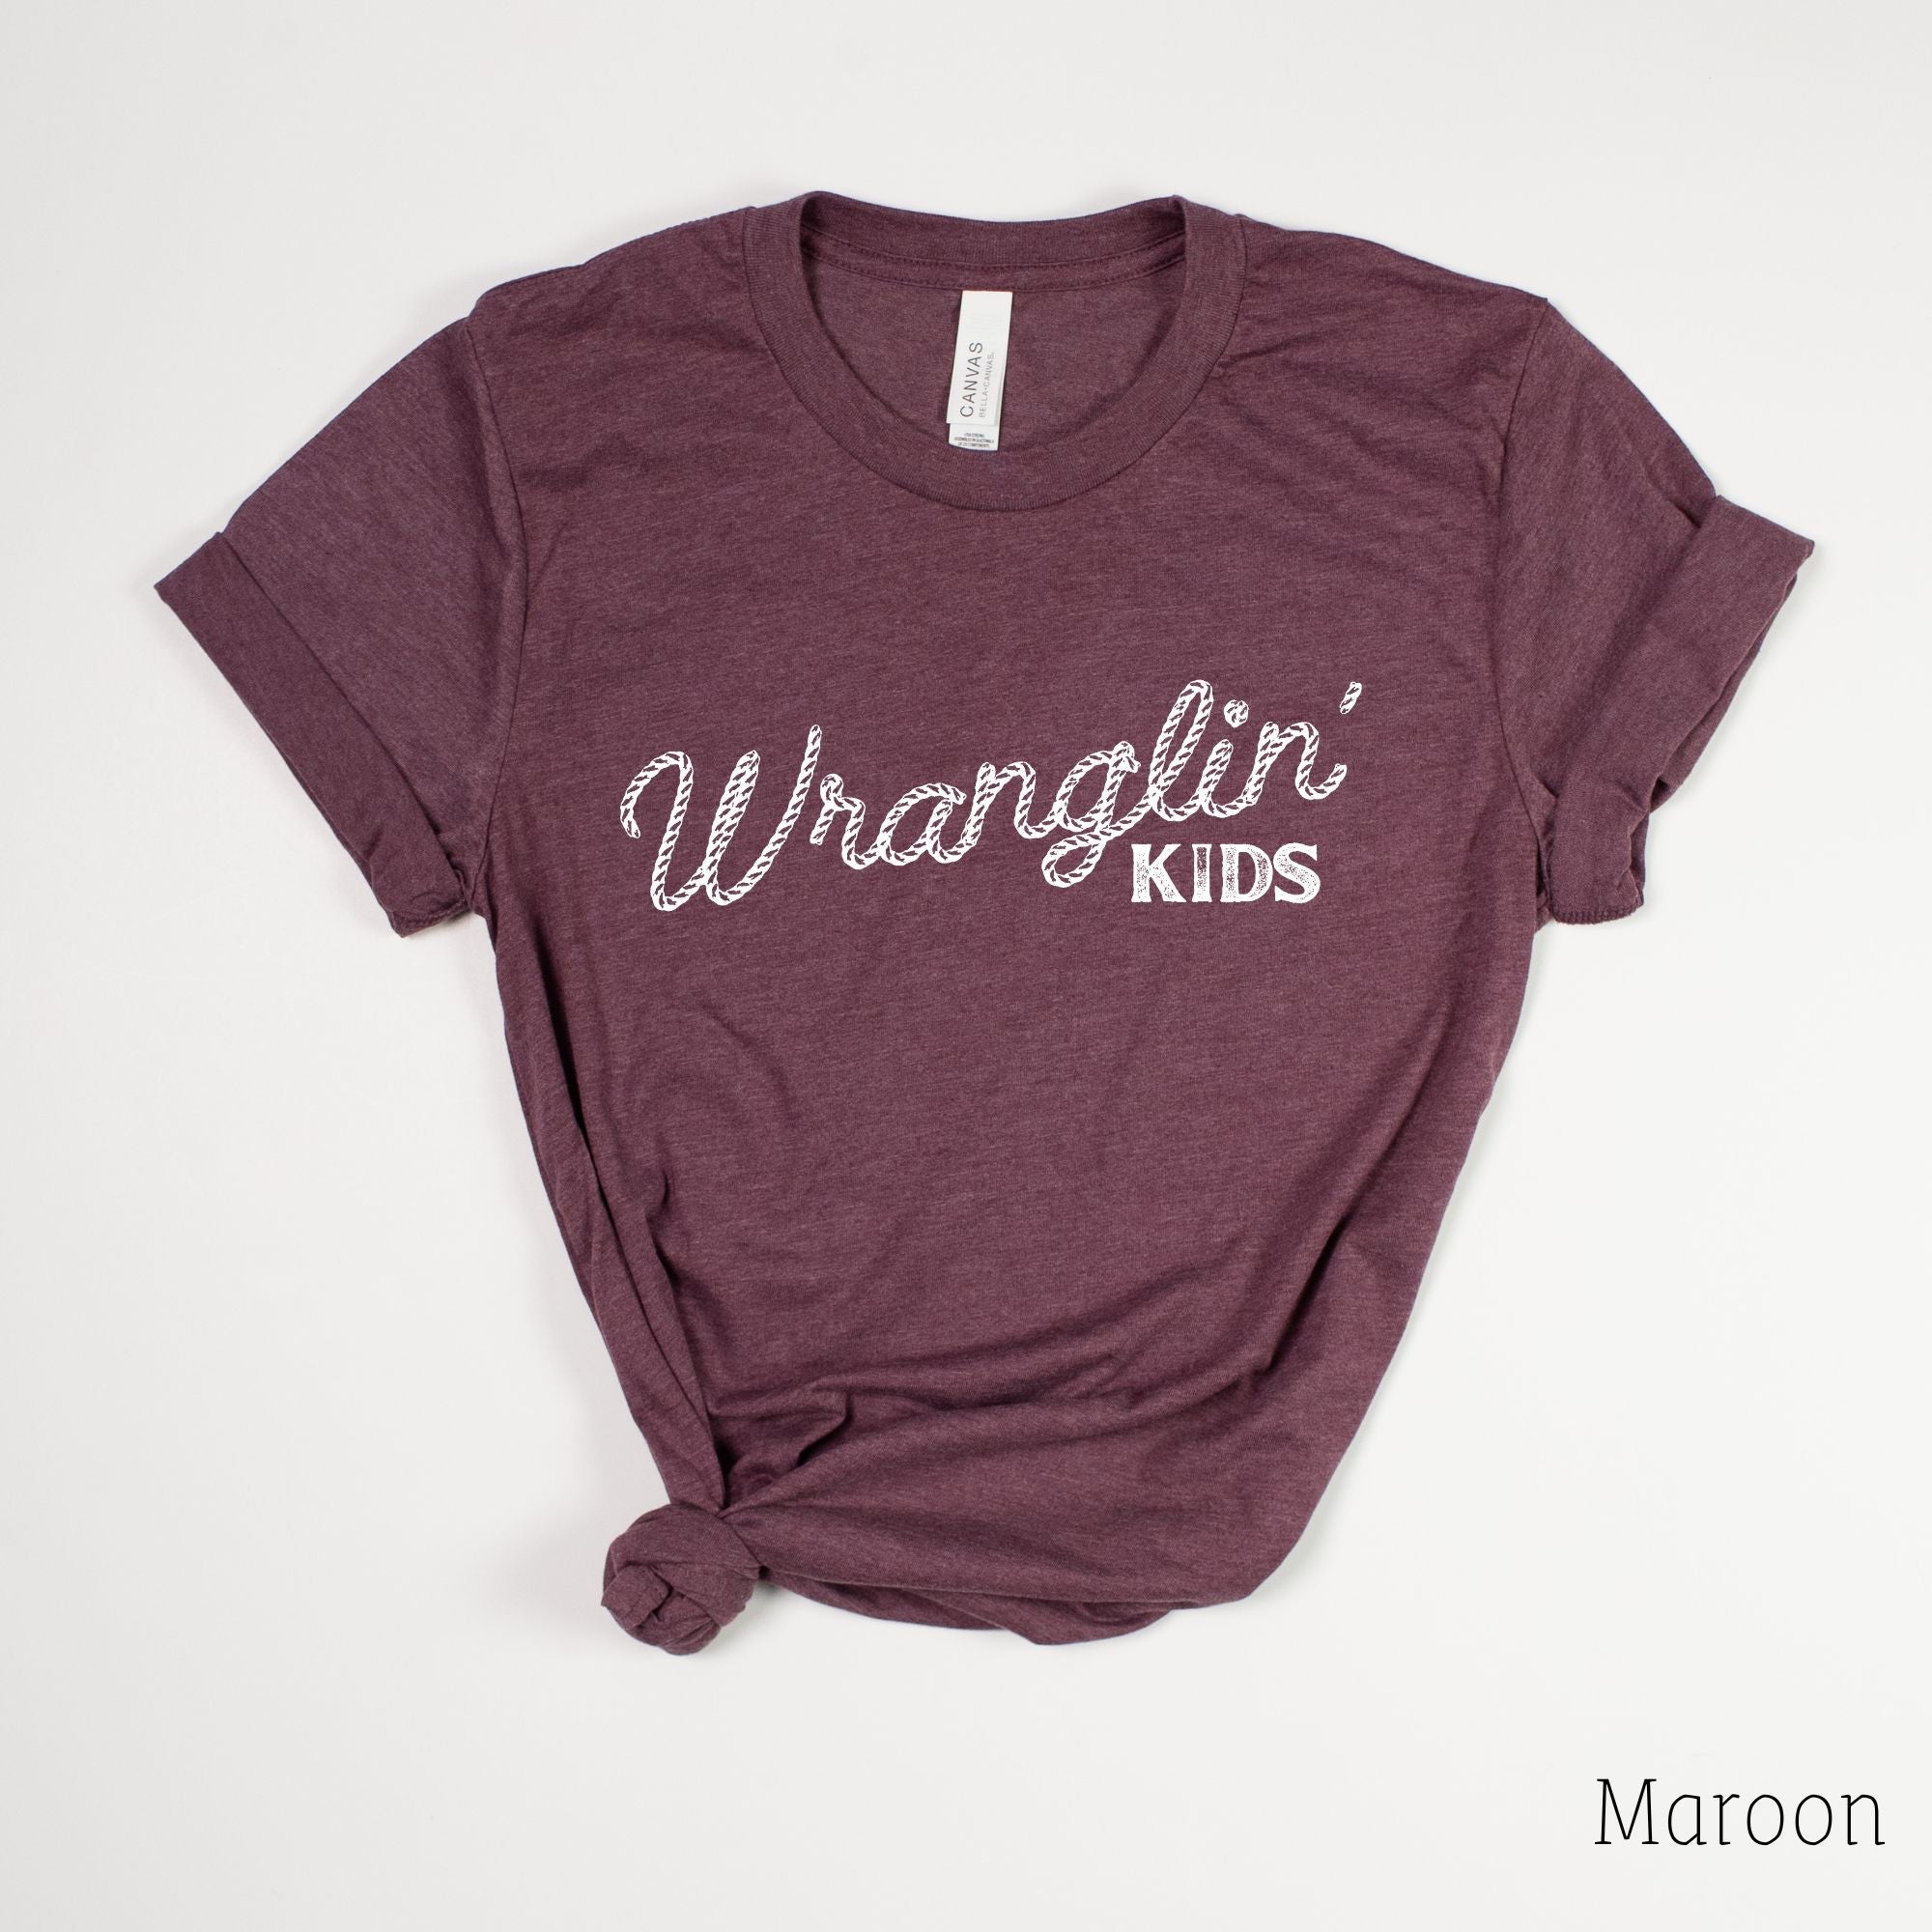 Wranglin' Kids Graphic Tee, Funny Shirt for Mom *UNISEX FIT*-208 Tees Wholesale, Idaho